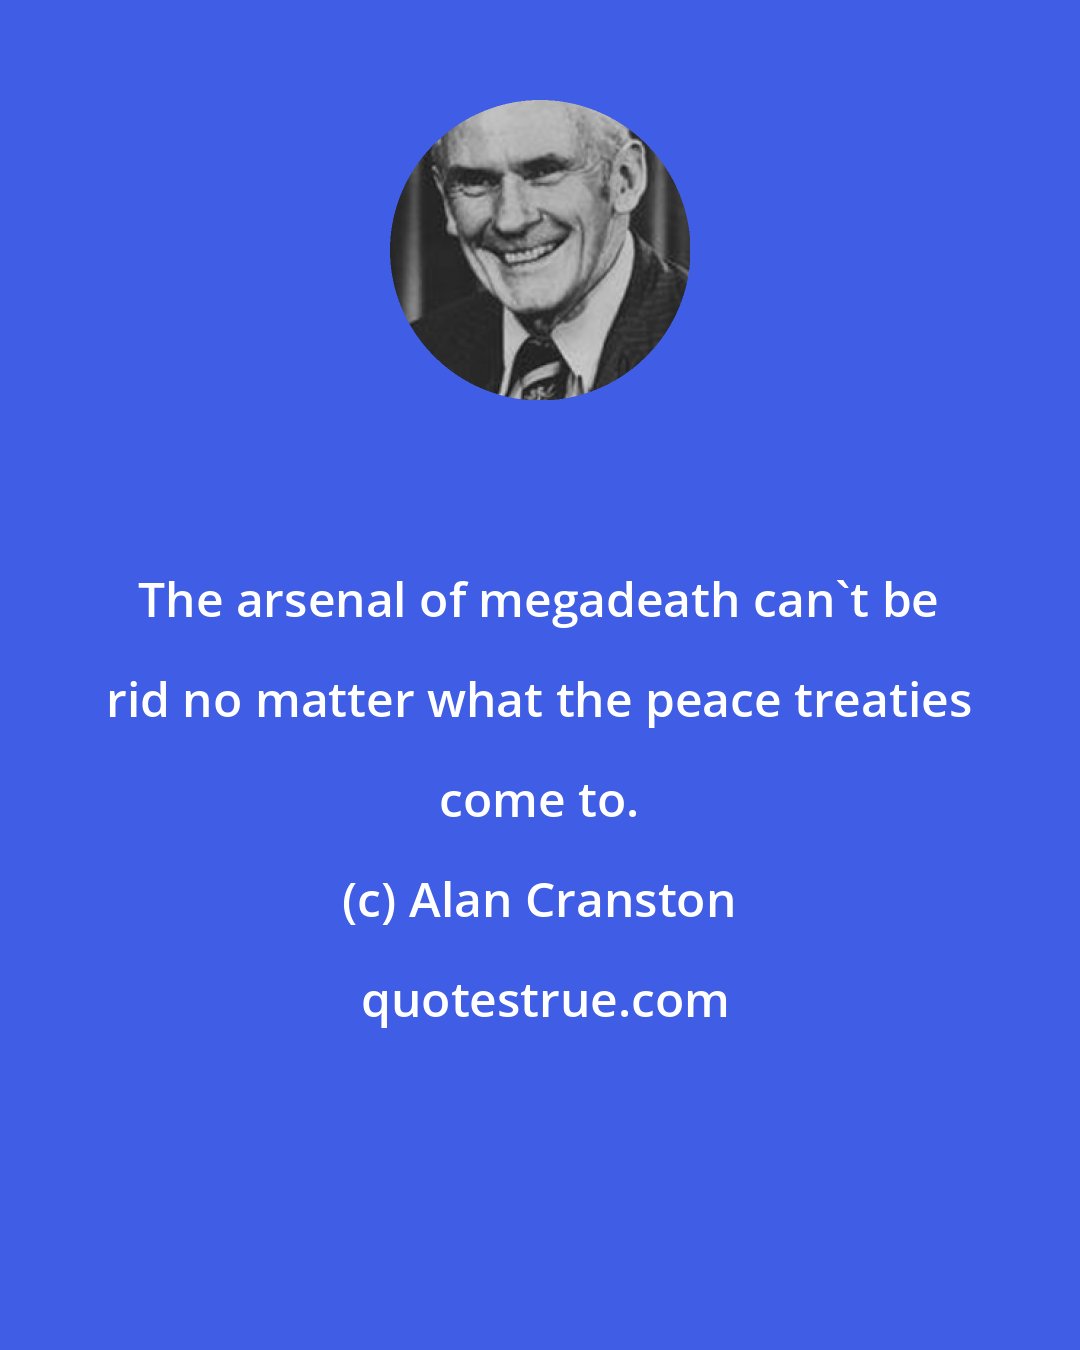 Alan Cranston: The arsenal of megadeath can't be rid no matter what the peace treaties come to.